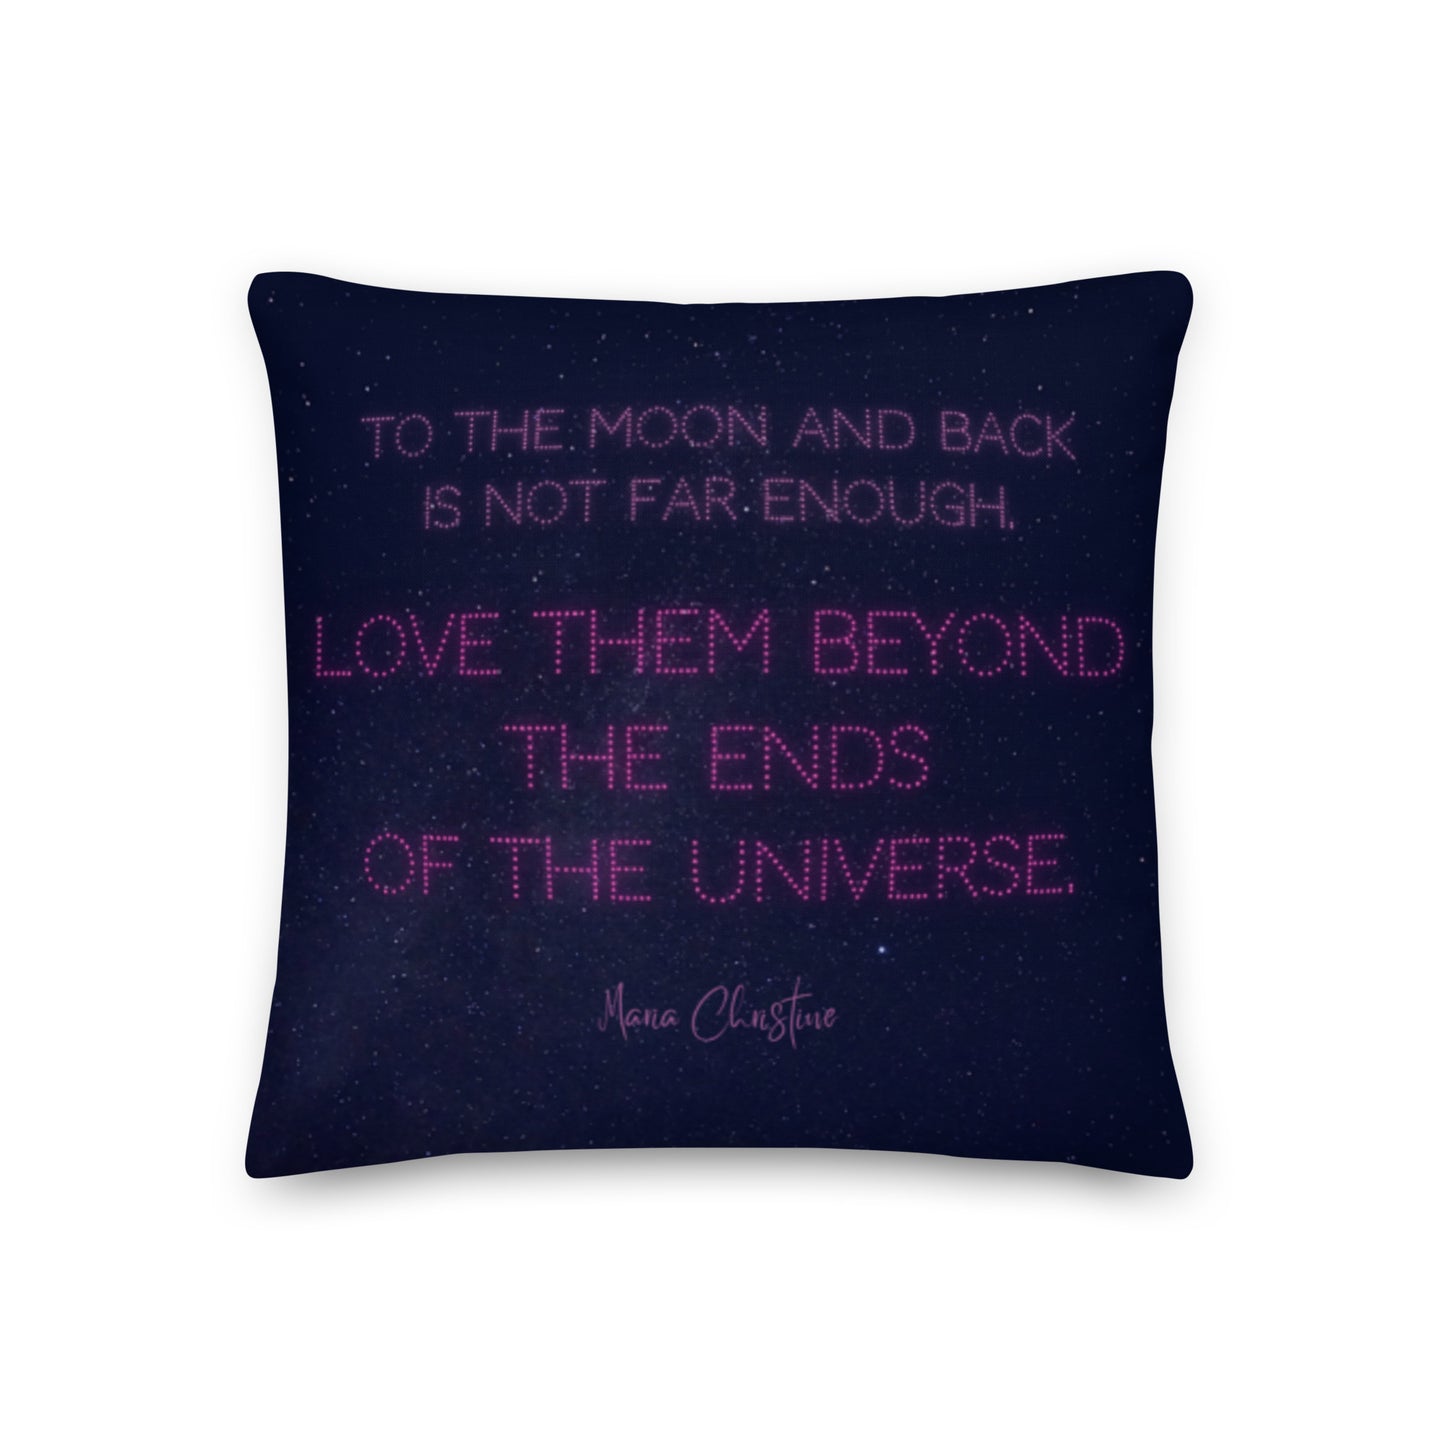 Premium Throw Pillow: Love Them Beyond... by Maria Christine (pink text)